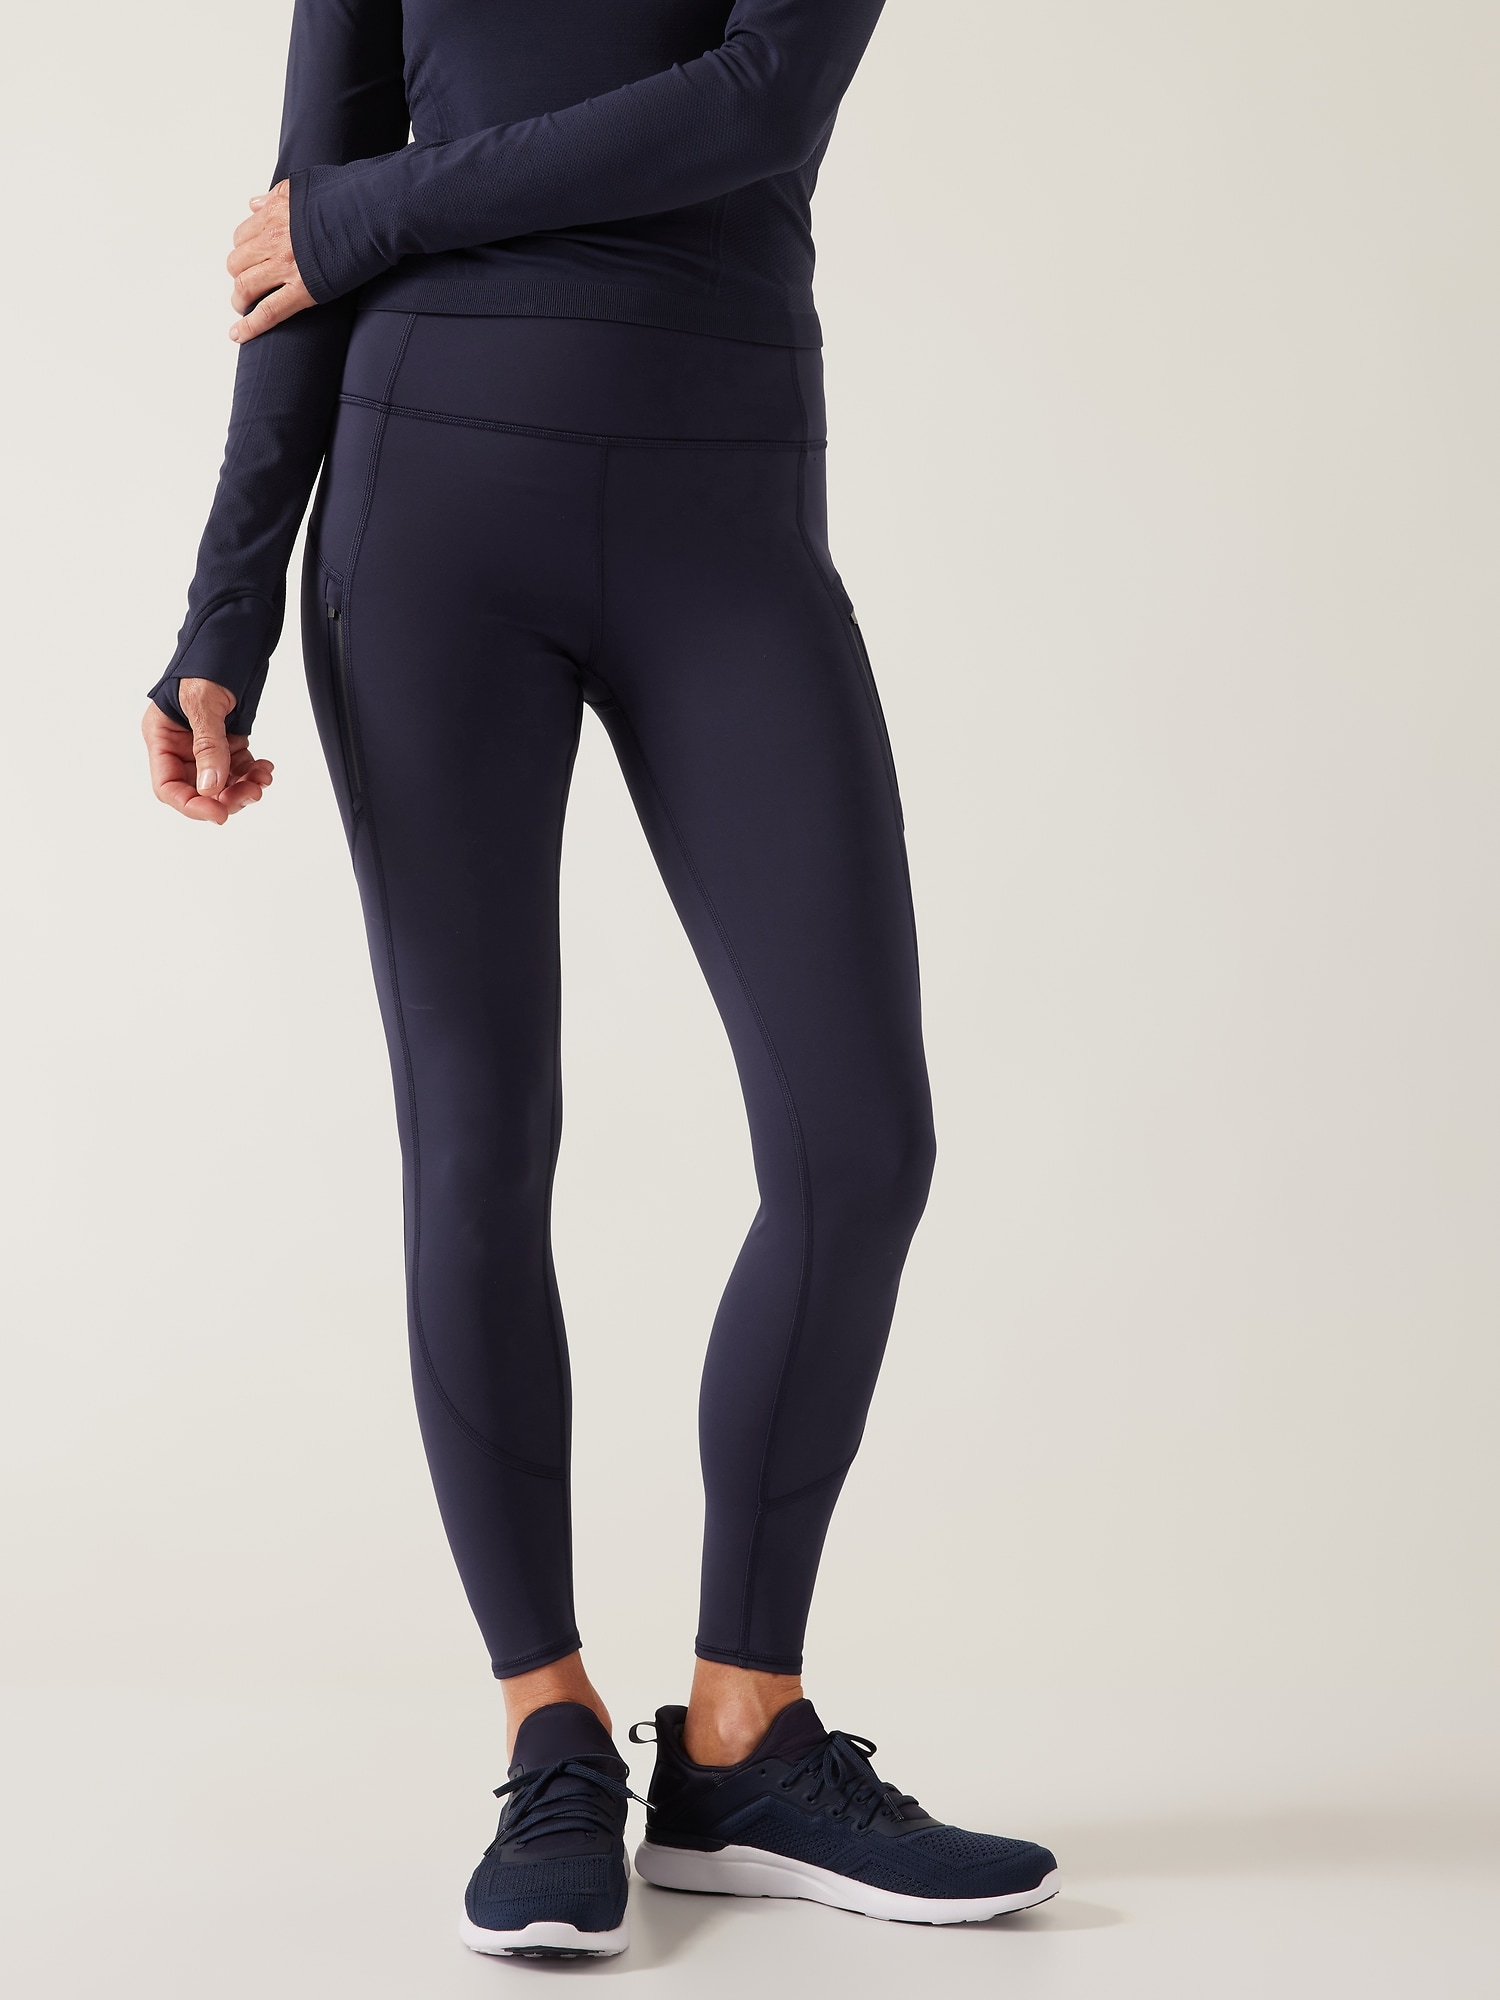 NWT Athleta Rainier Tight in Plush SuperSonic  Leggings are not pants,  Pants for women, Tight workout pants